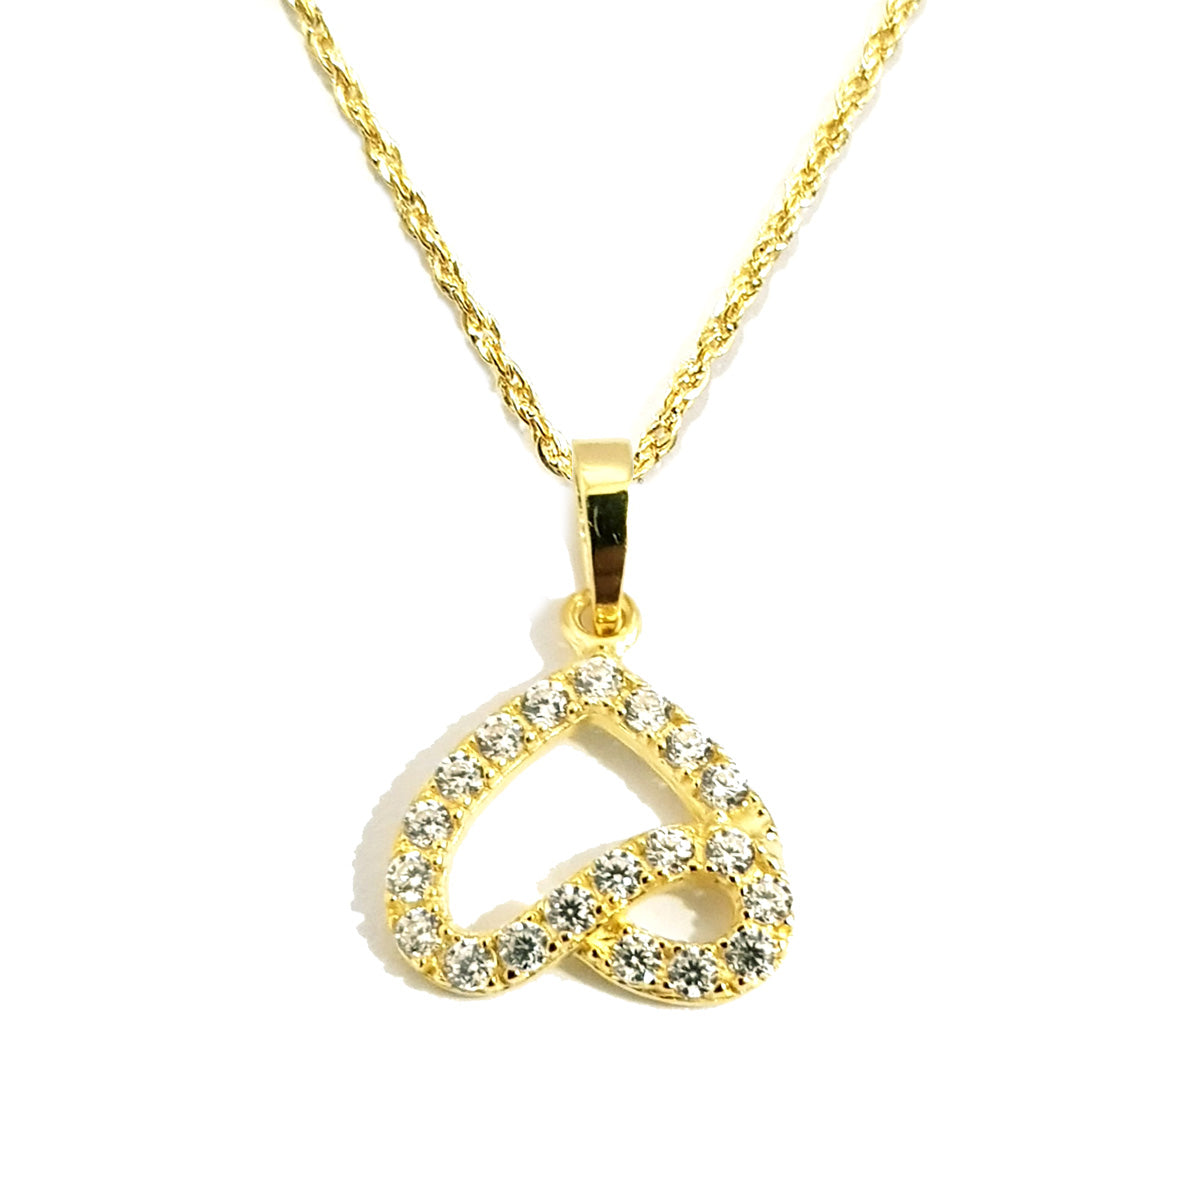 18K Pure Gold Heart Design With Zircon Stone Necklace